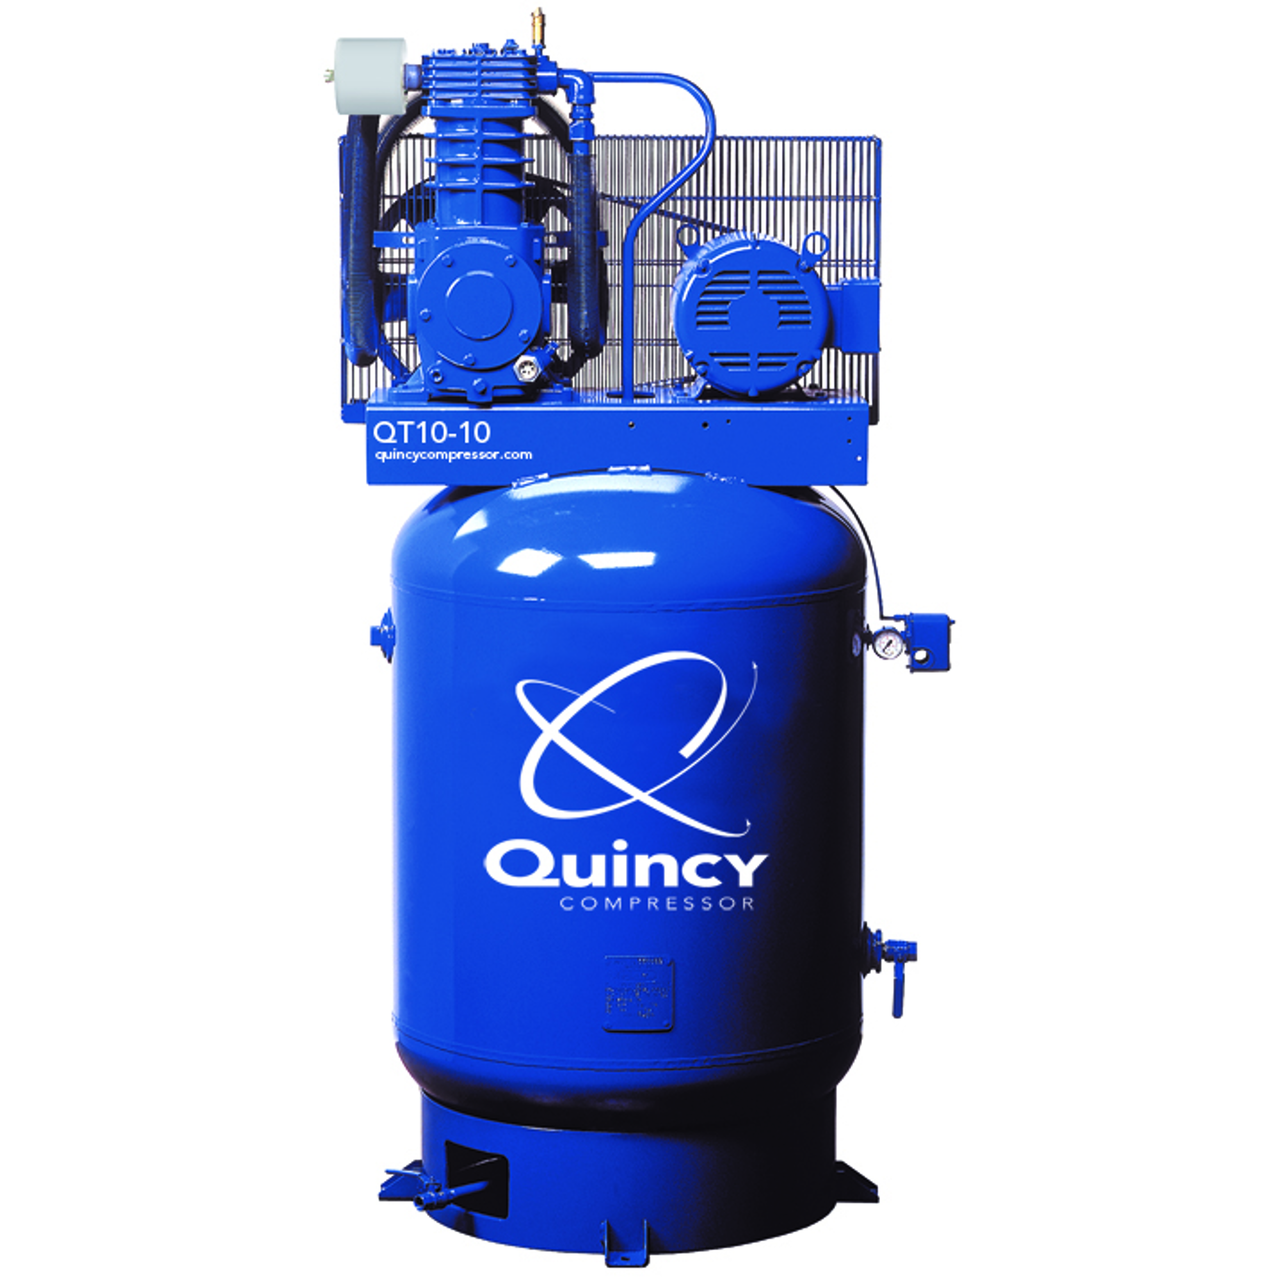 Quincy P2103DS12VCB46M 10 HP MAX, 460 Volt Three Phase, Two Stage, 120 Gallon Vertical Air Compressor